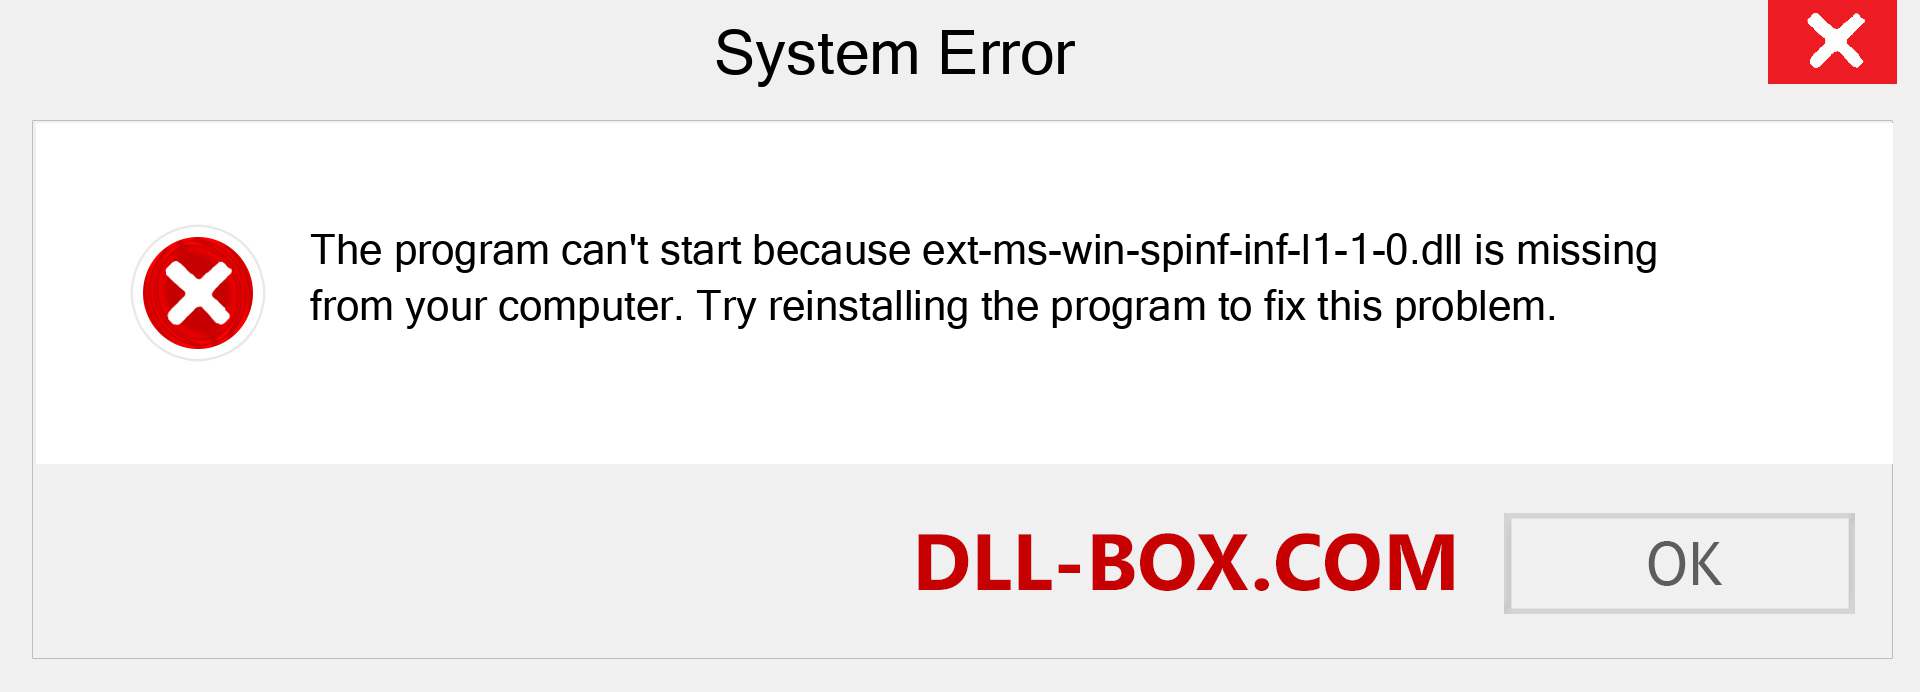  ext-ms-win-spinf-inf-l1-1-0.dll file is missing?. Download for Windows 7, 8, 10 - Fix  ext-ms-win-spinf-inf-l1-1-0 dll Missing Error on Windows, photos, images